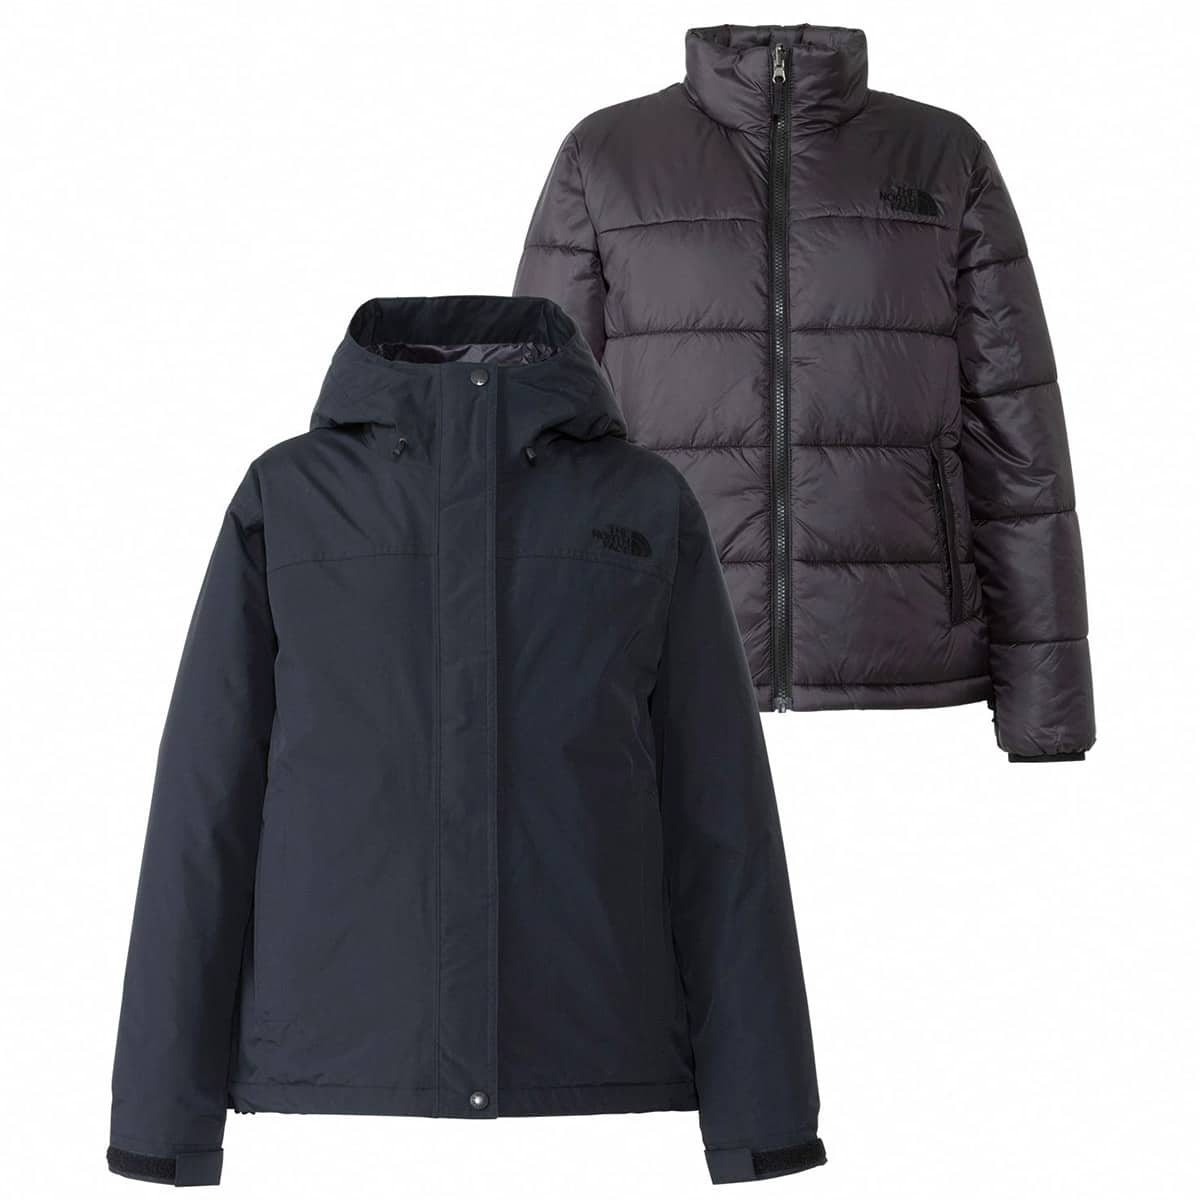 THE NORTH FACE CASSIUS TRICLIMATE JACKET ブラック2 23FW-I